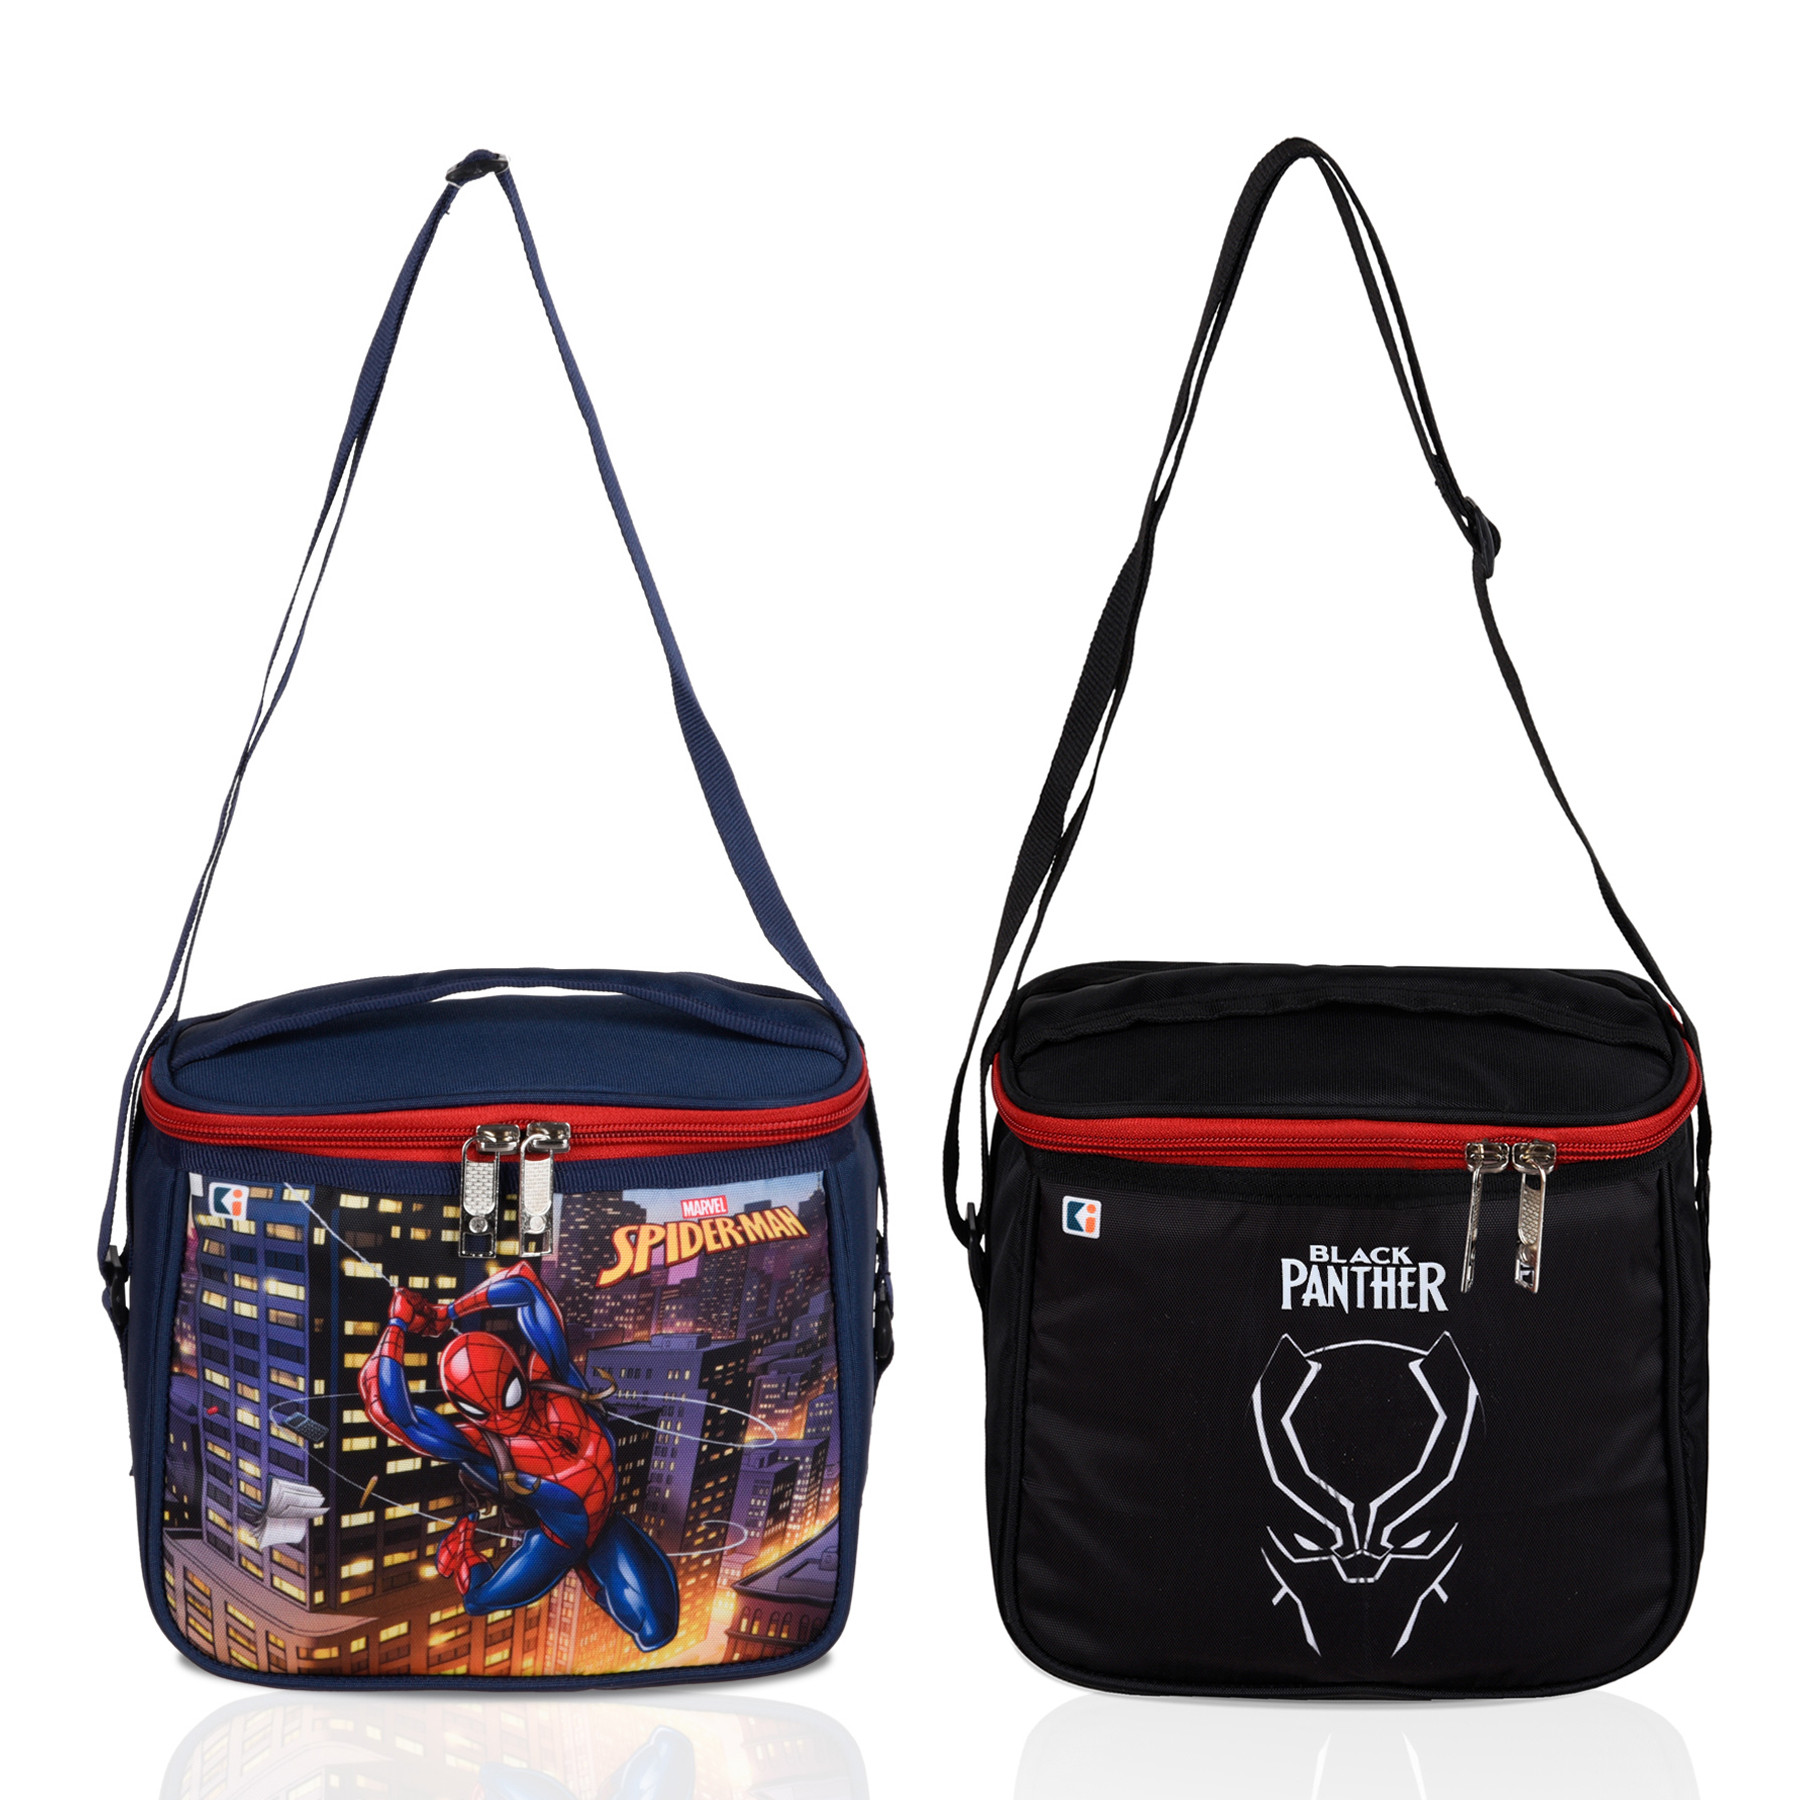 Kuber Industries Pack of 2 Marvel Lunch Bag | Rexine Waterproof Tiffin Cover | Lunch Bag for Office | School Lunch Bag | Kids Lunch Bag with Handle | Camping Lunch Bag | Navy Blue & Black